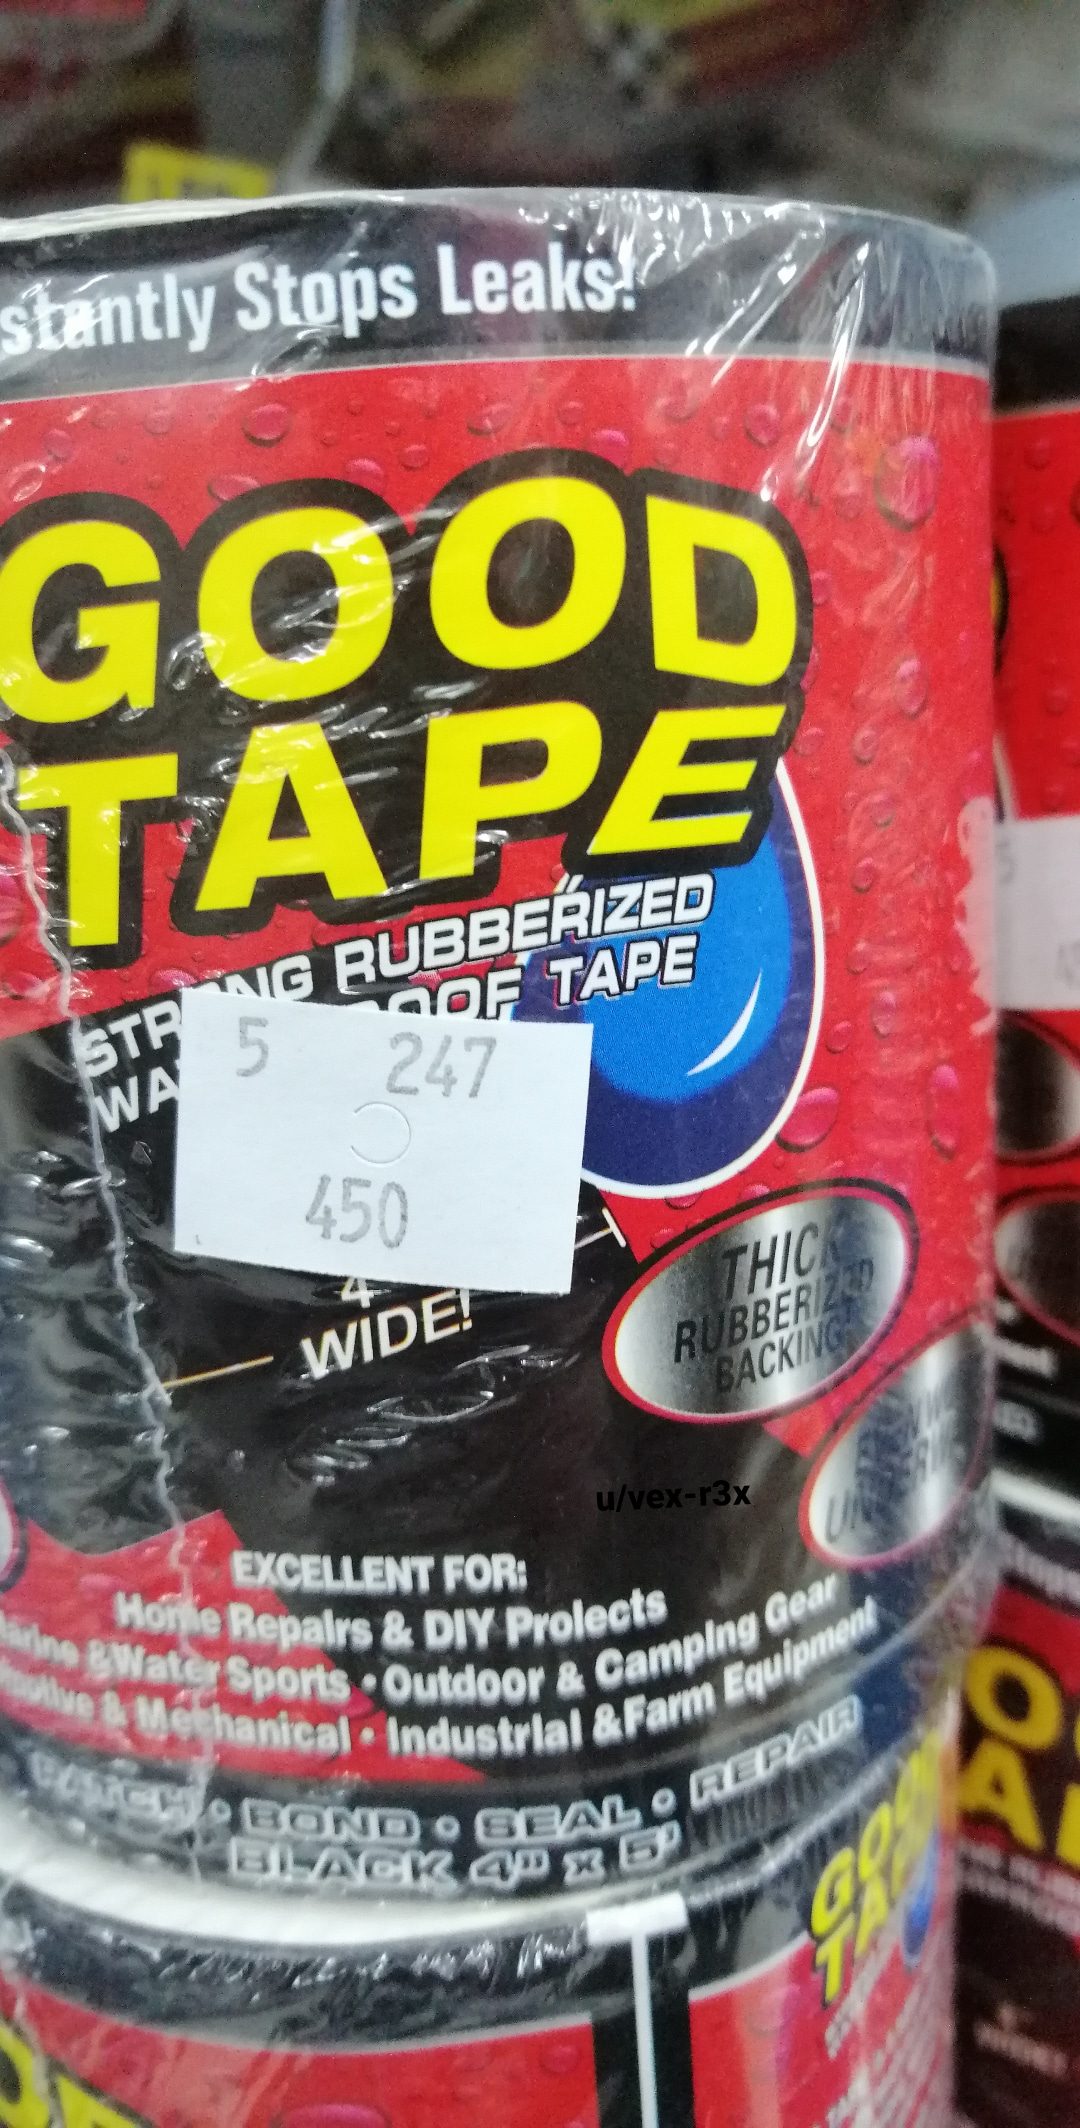 The goodest tape of all